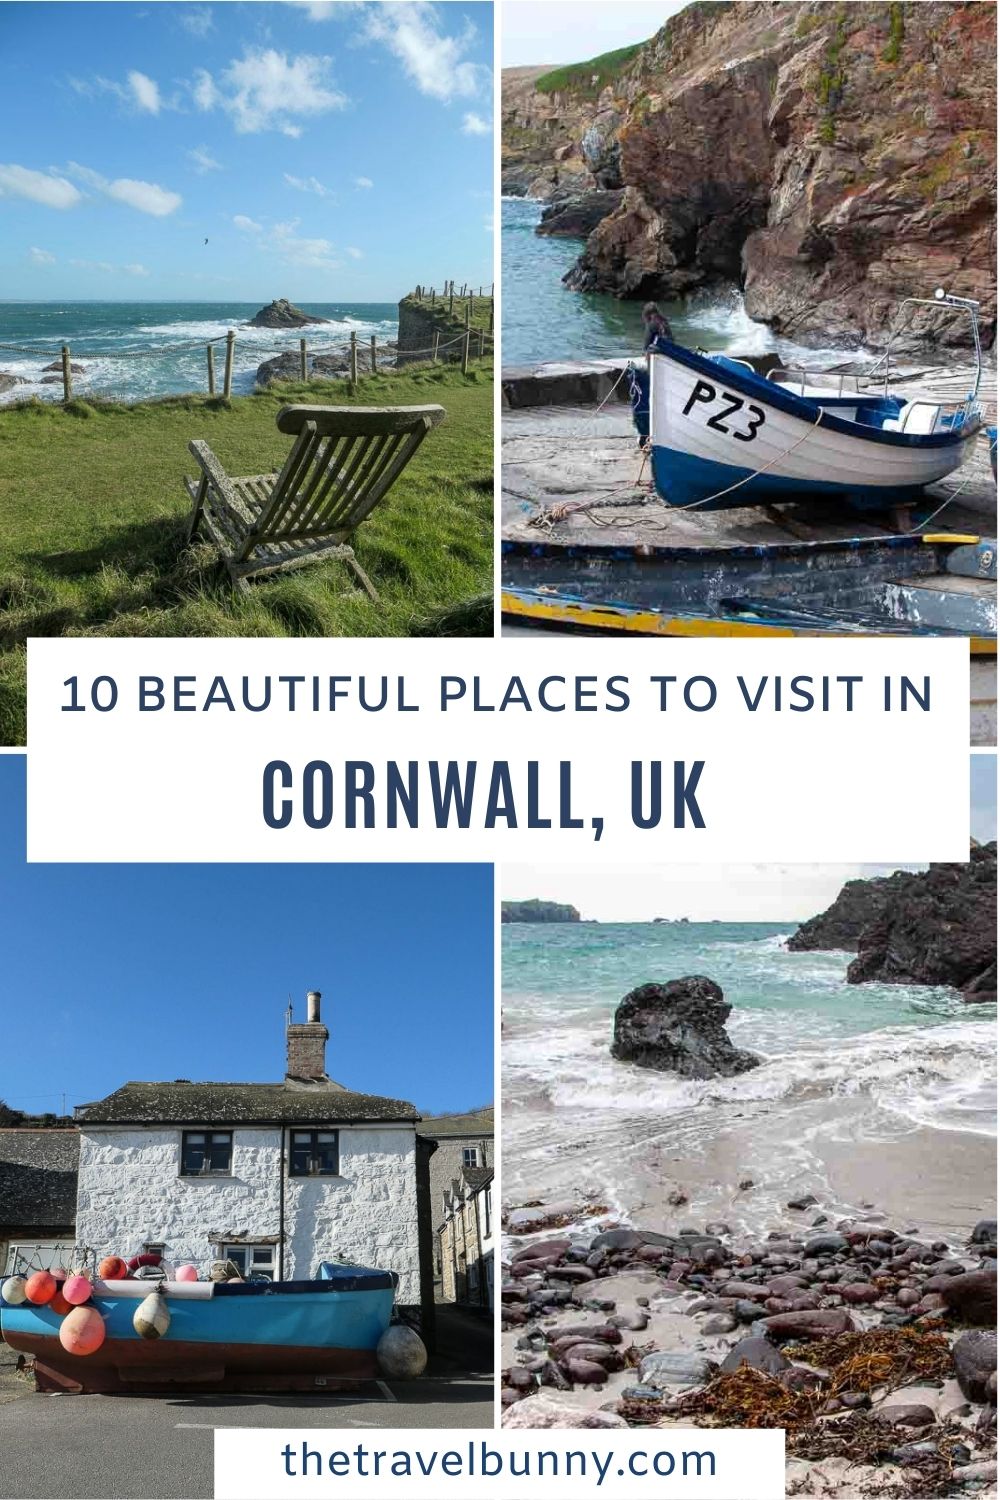 Ten-beautiful-places-to-visit-in-Cornwall-1 | The Travelbunny